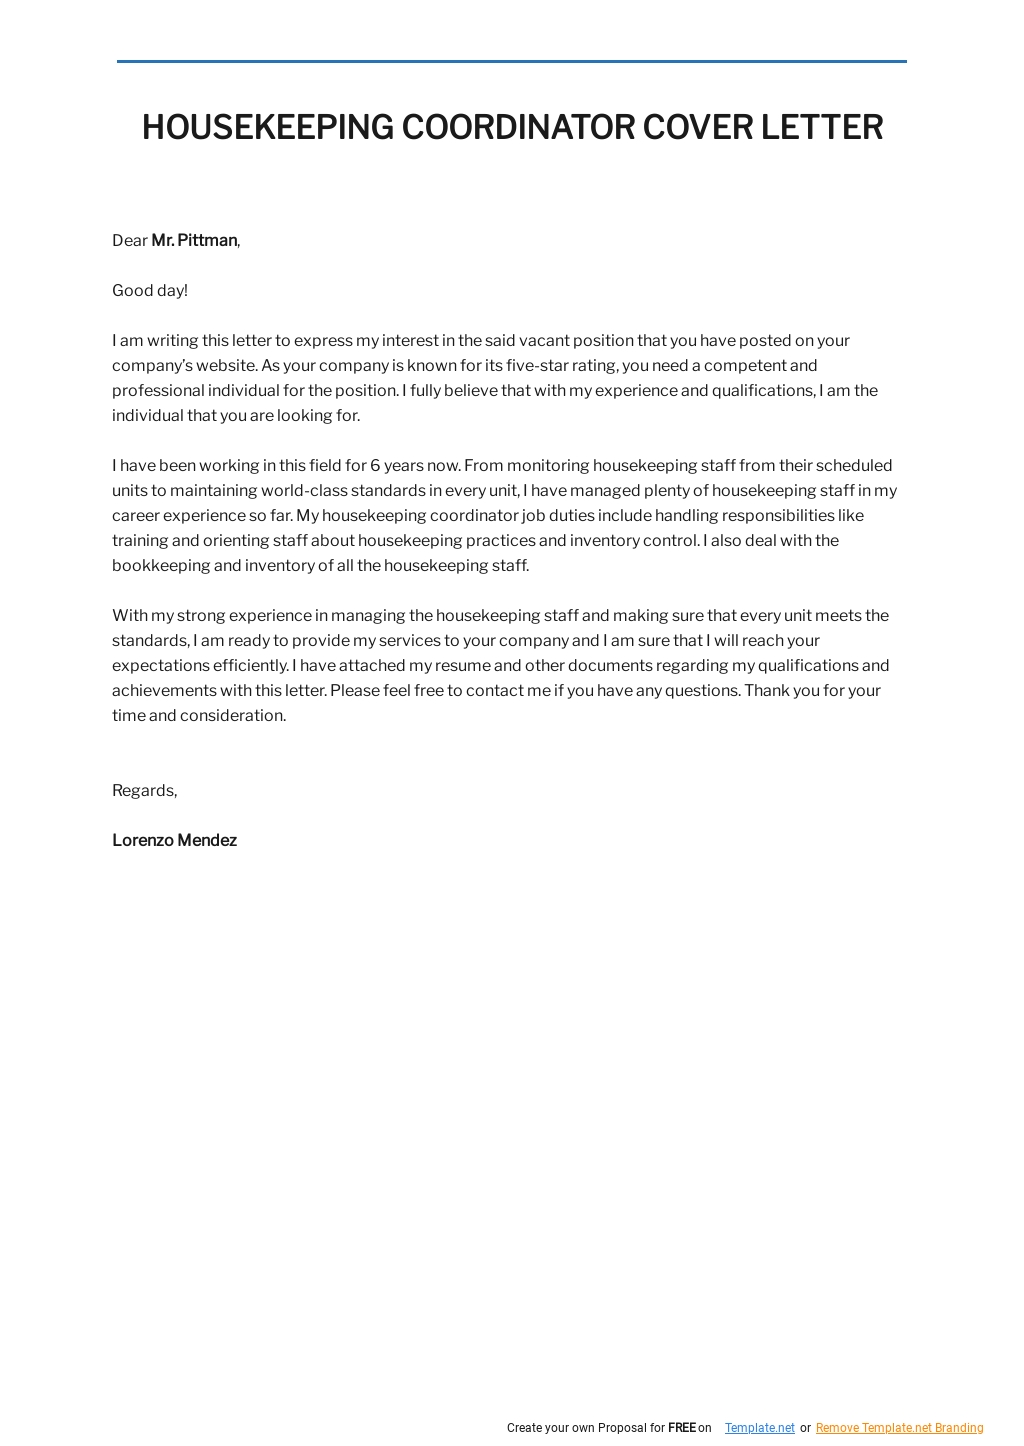 Free Housekeeping Coordinator Cover Letter Template.jpe